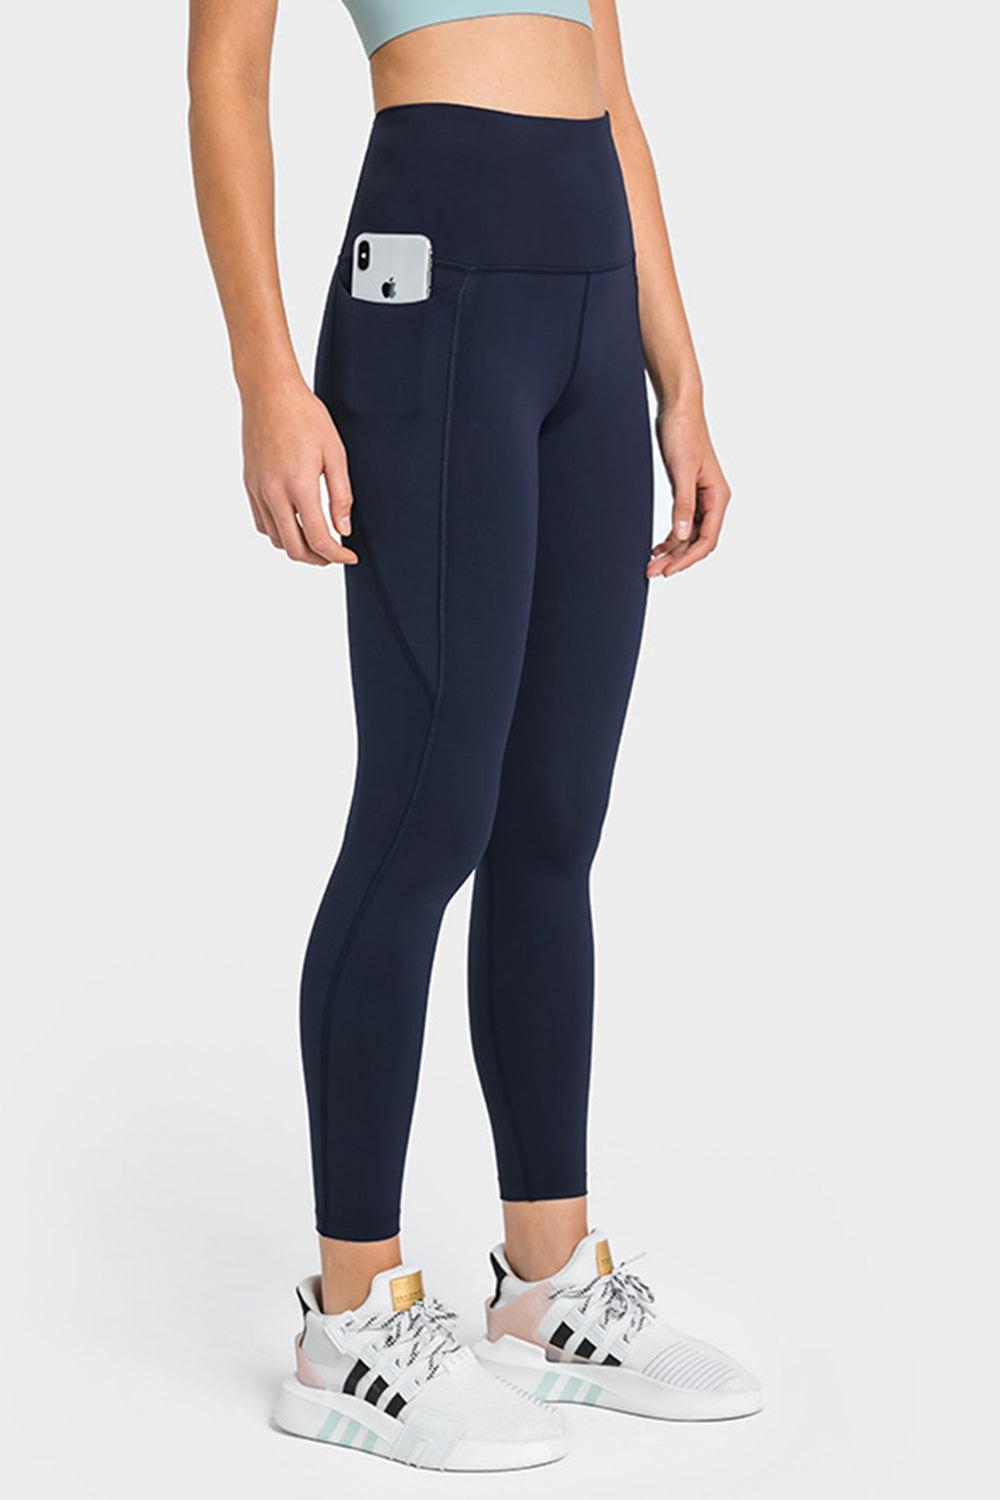 High Waist Ankle-Length Yoga Leggings with Pockets-TOPS / DRESSES-[Adult]-[Female]-Navy-4-Blue Zone Planet